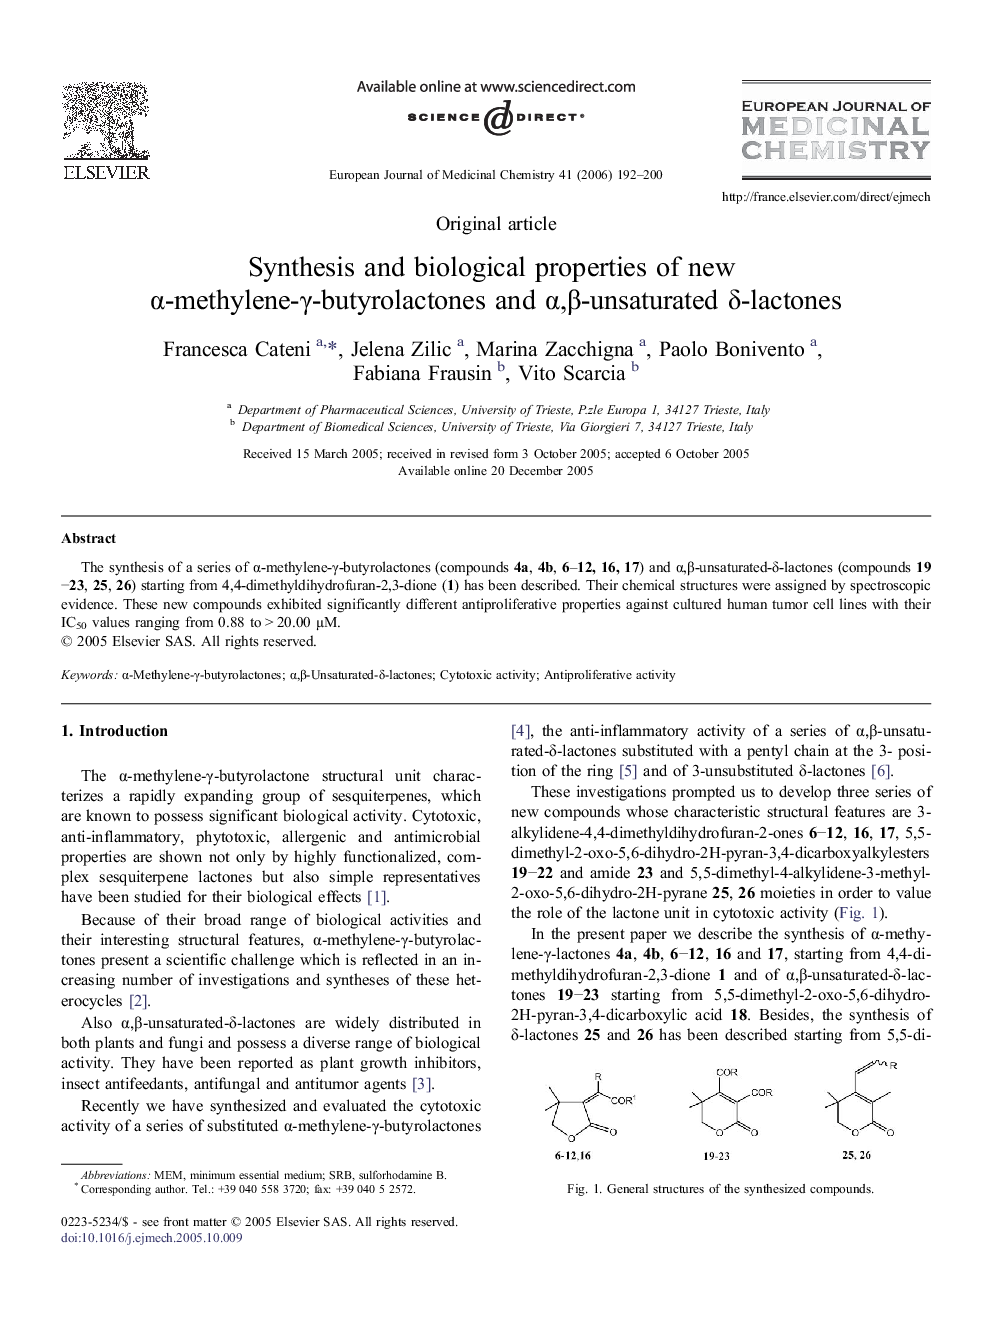 Synthesis and biological properties of new α-methylene-γ-butyrolactones and α,β-unsaturated δ-lactones